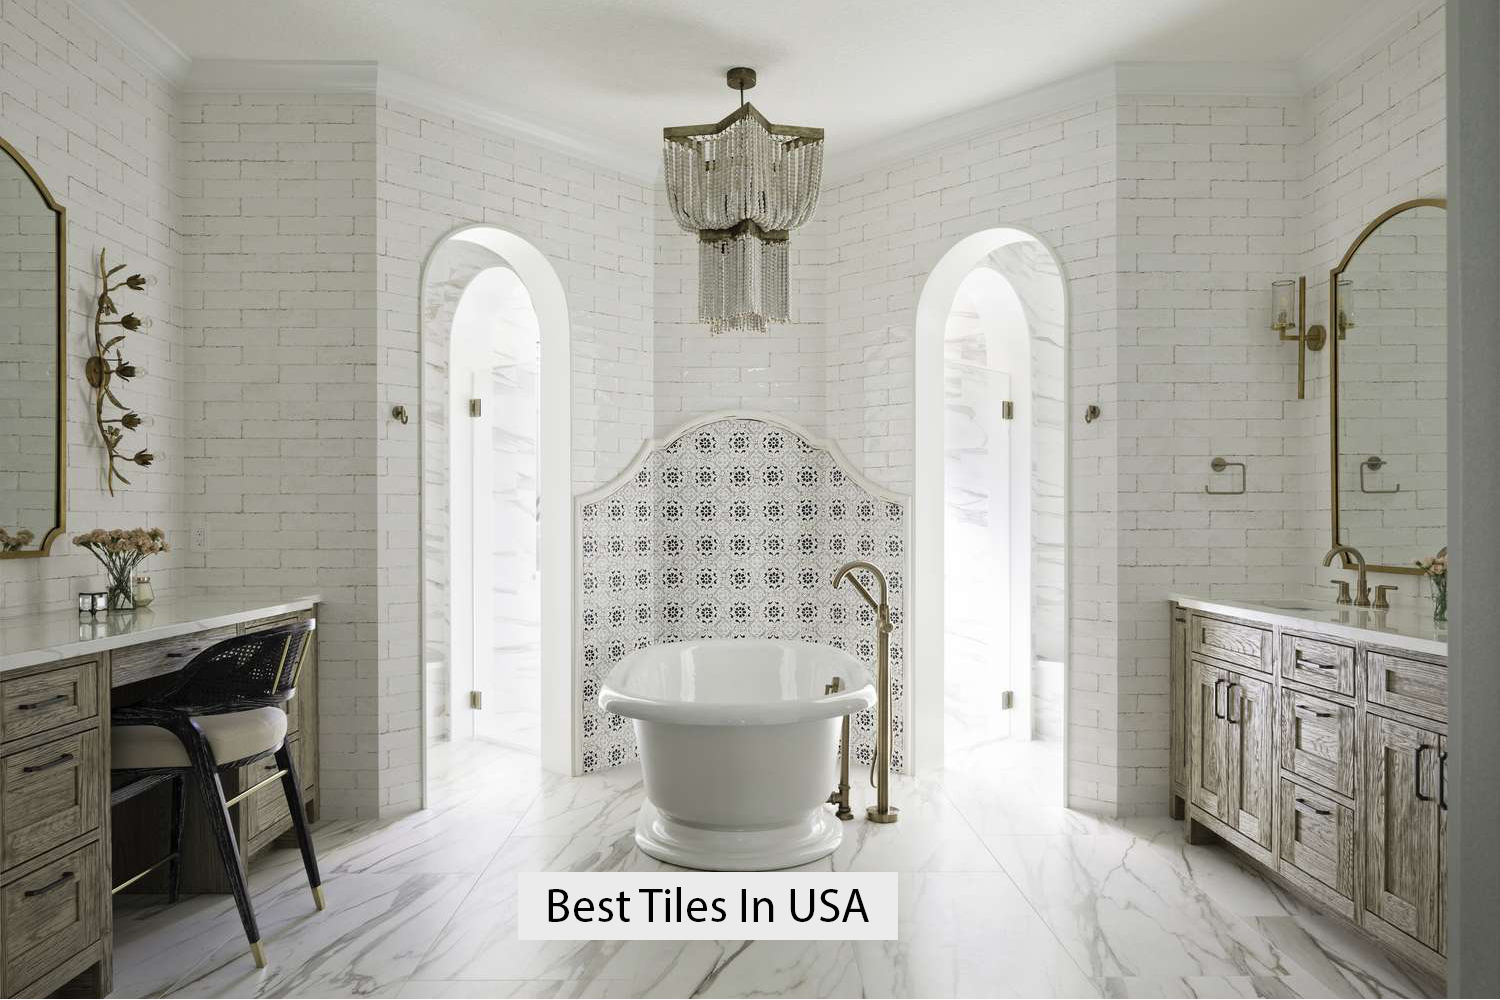 Best Tiles in the USA